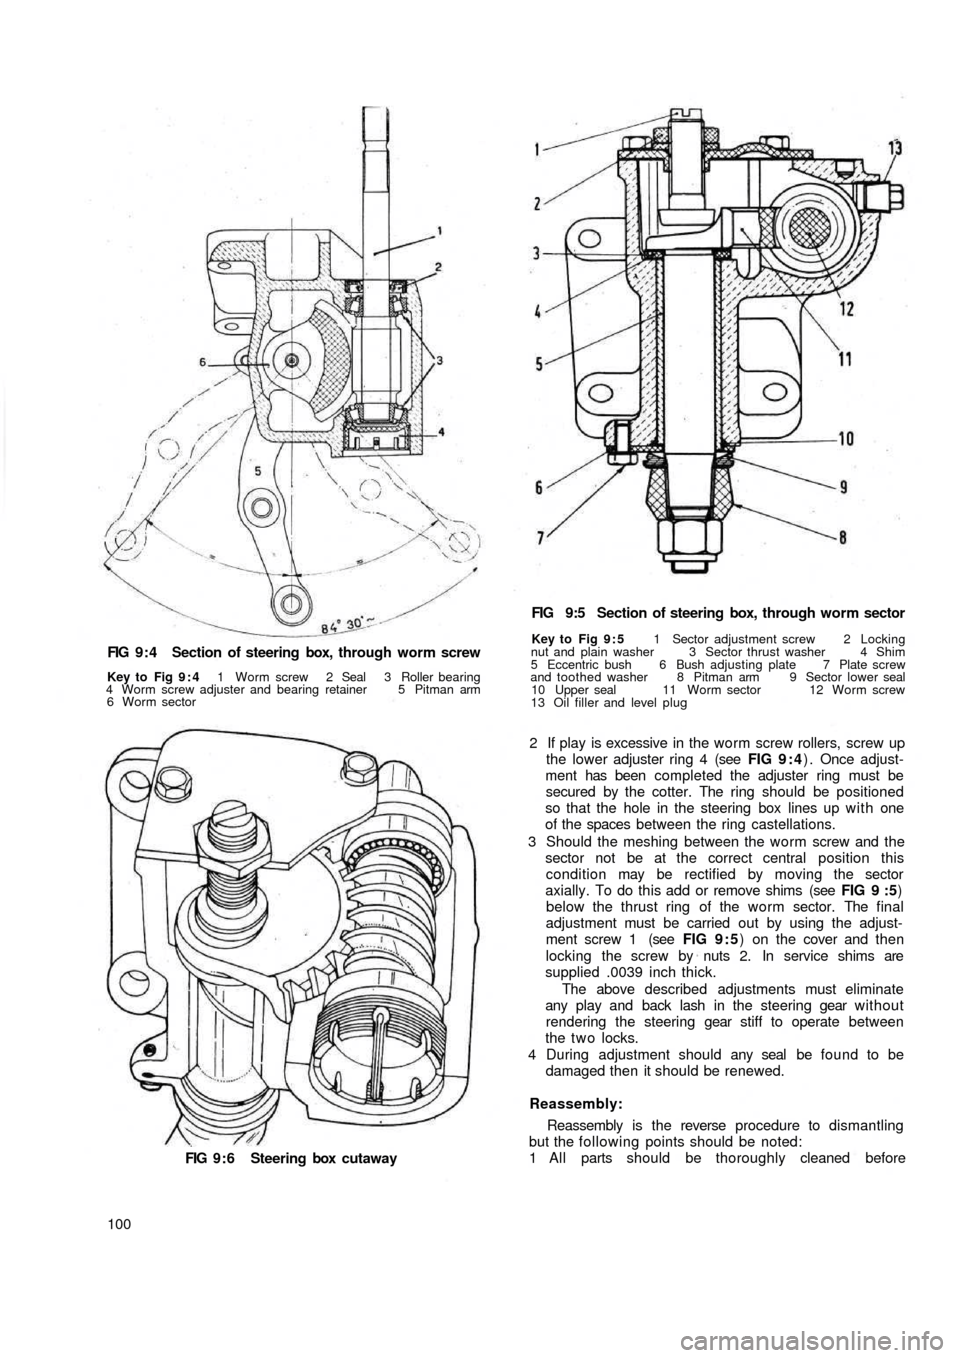 FIAT 500 1970 1.G Owners Manual FIG 9 : 4  Section of steering box,  through worm screw
Key to  Fig 9 : 4 1 Worm screw 2 Seal 3 Roller bearing
4 Worm screw adjuster and bearing retainer 5 Pitman arm
6 Worm sector
FIG 9 : 6  Steering